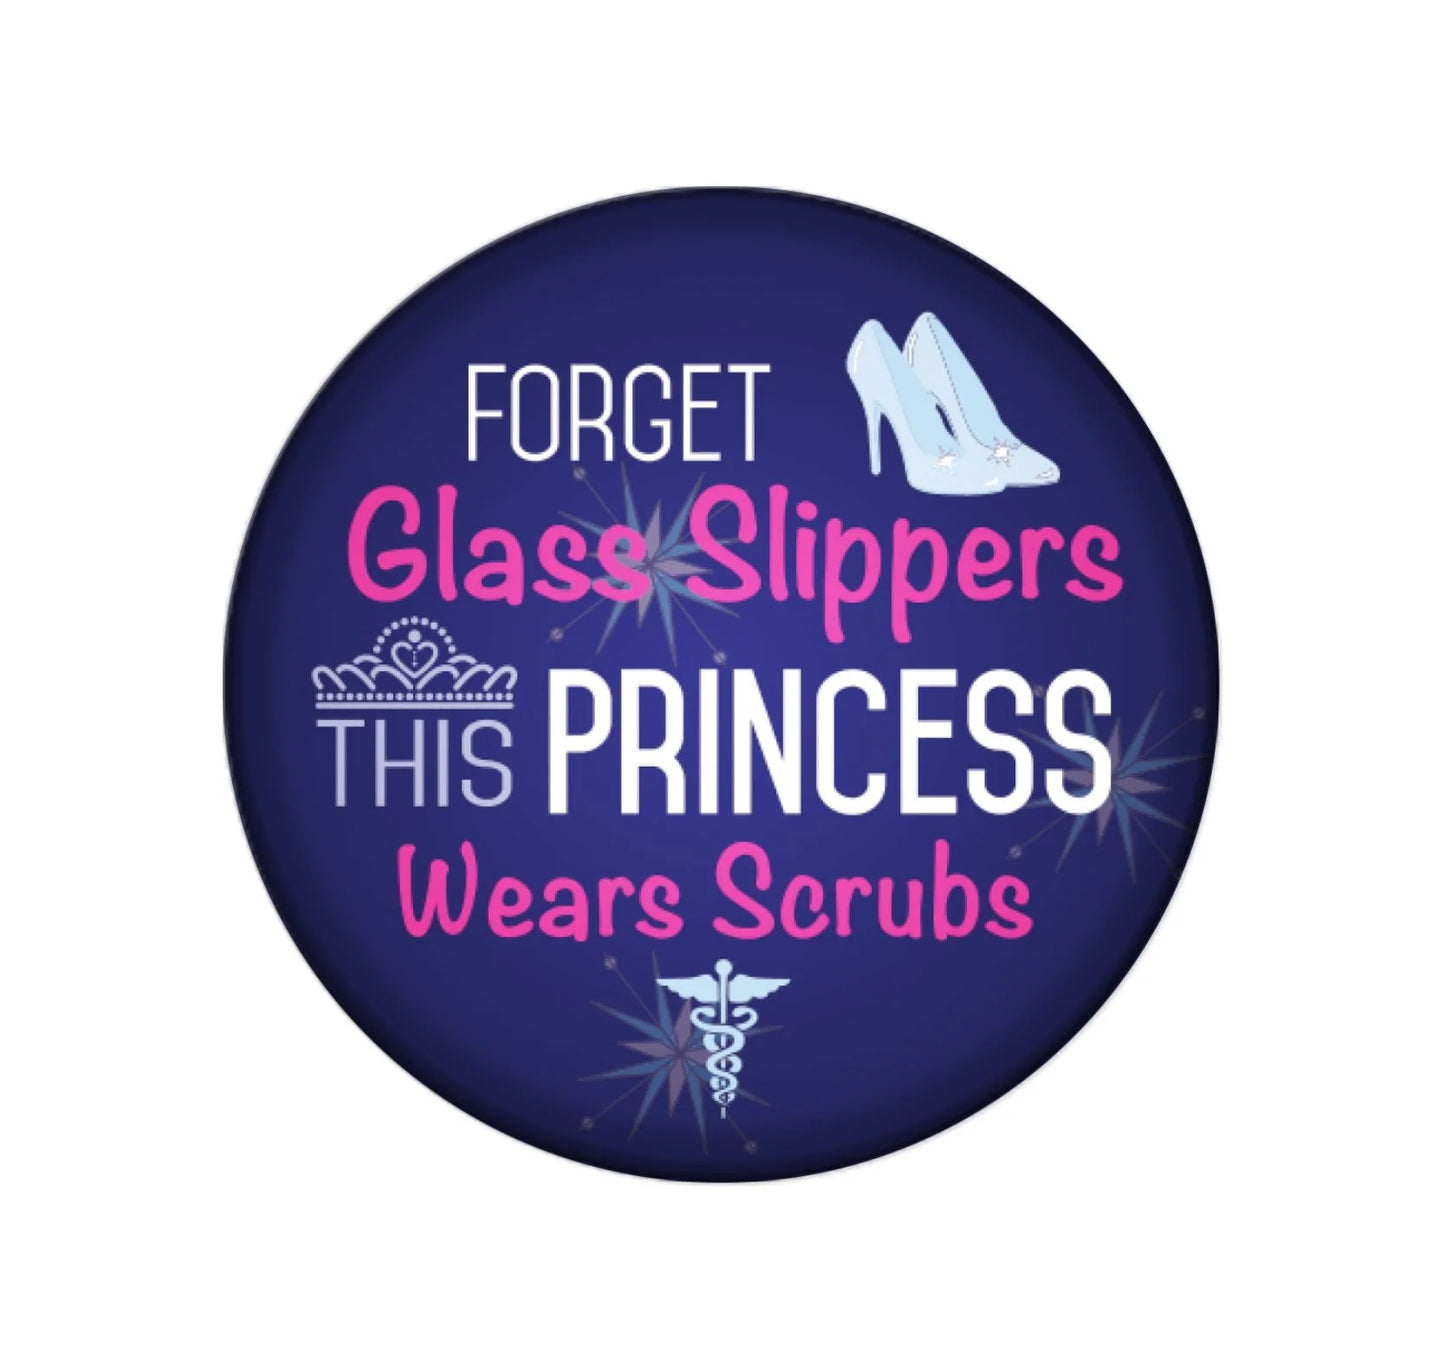 Forget class slippers this princess wears scrubs Badge reel